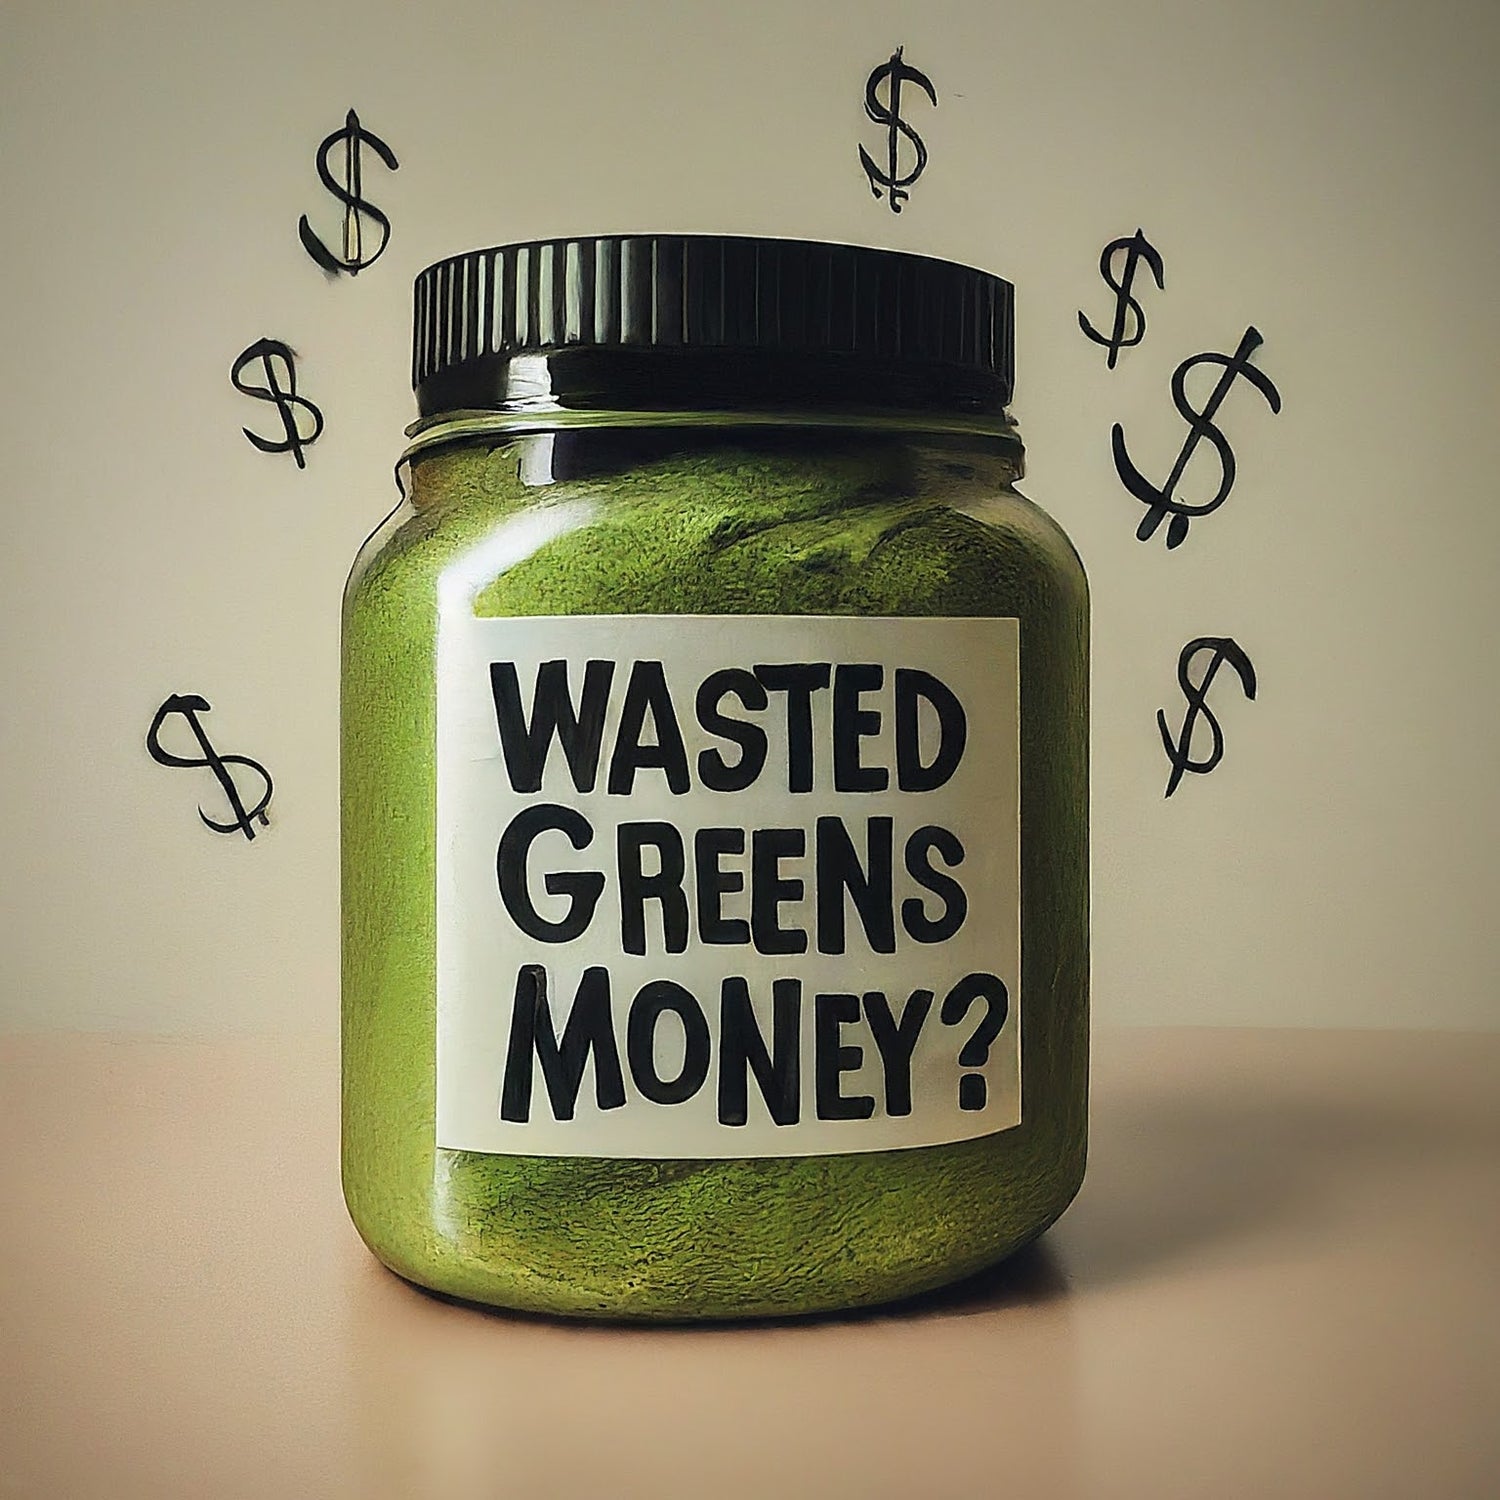 The "Green Hype" Is Your Green Going To Waste?